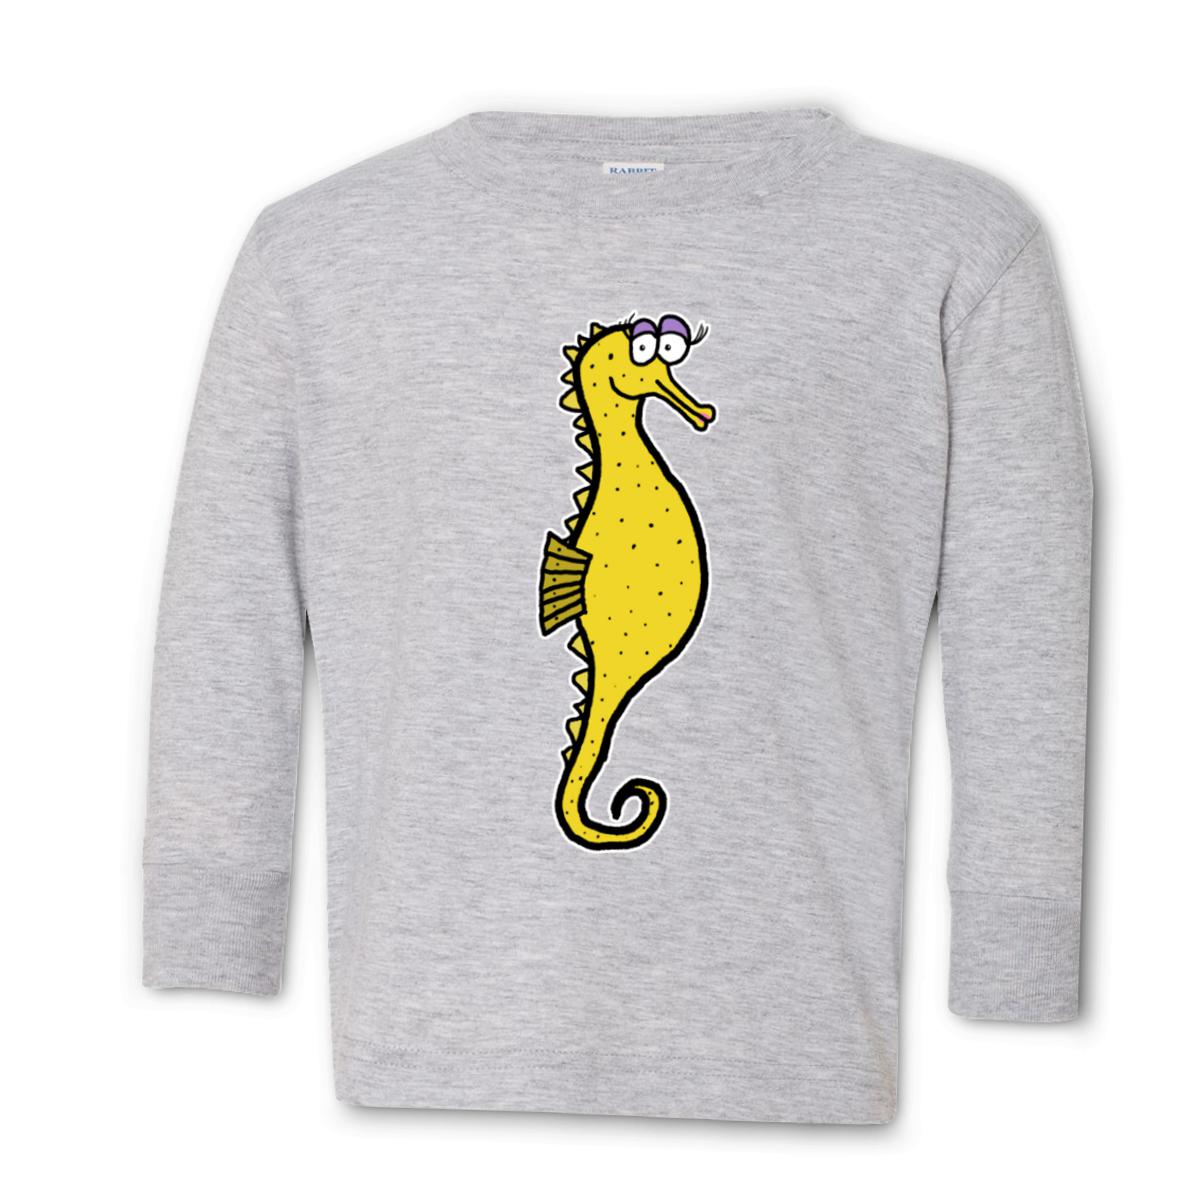 Seahorse Toddler Long Sleeve Tee 56T heather